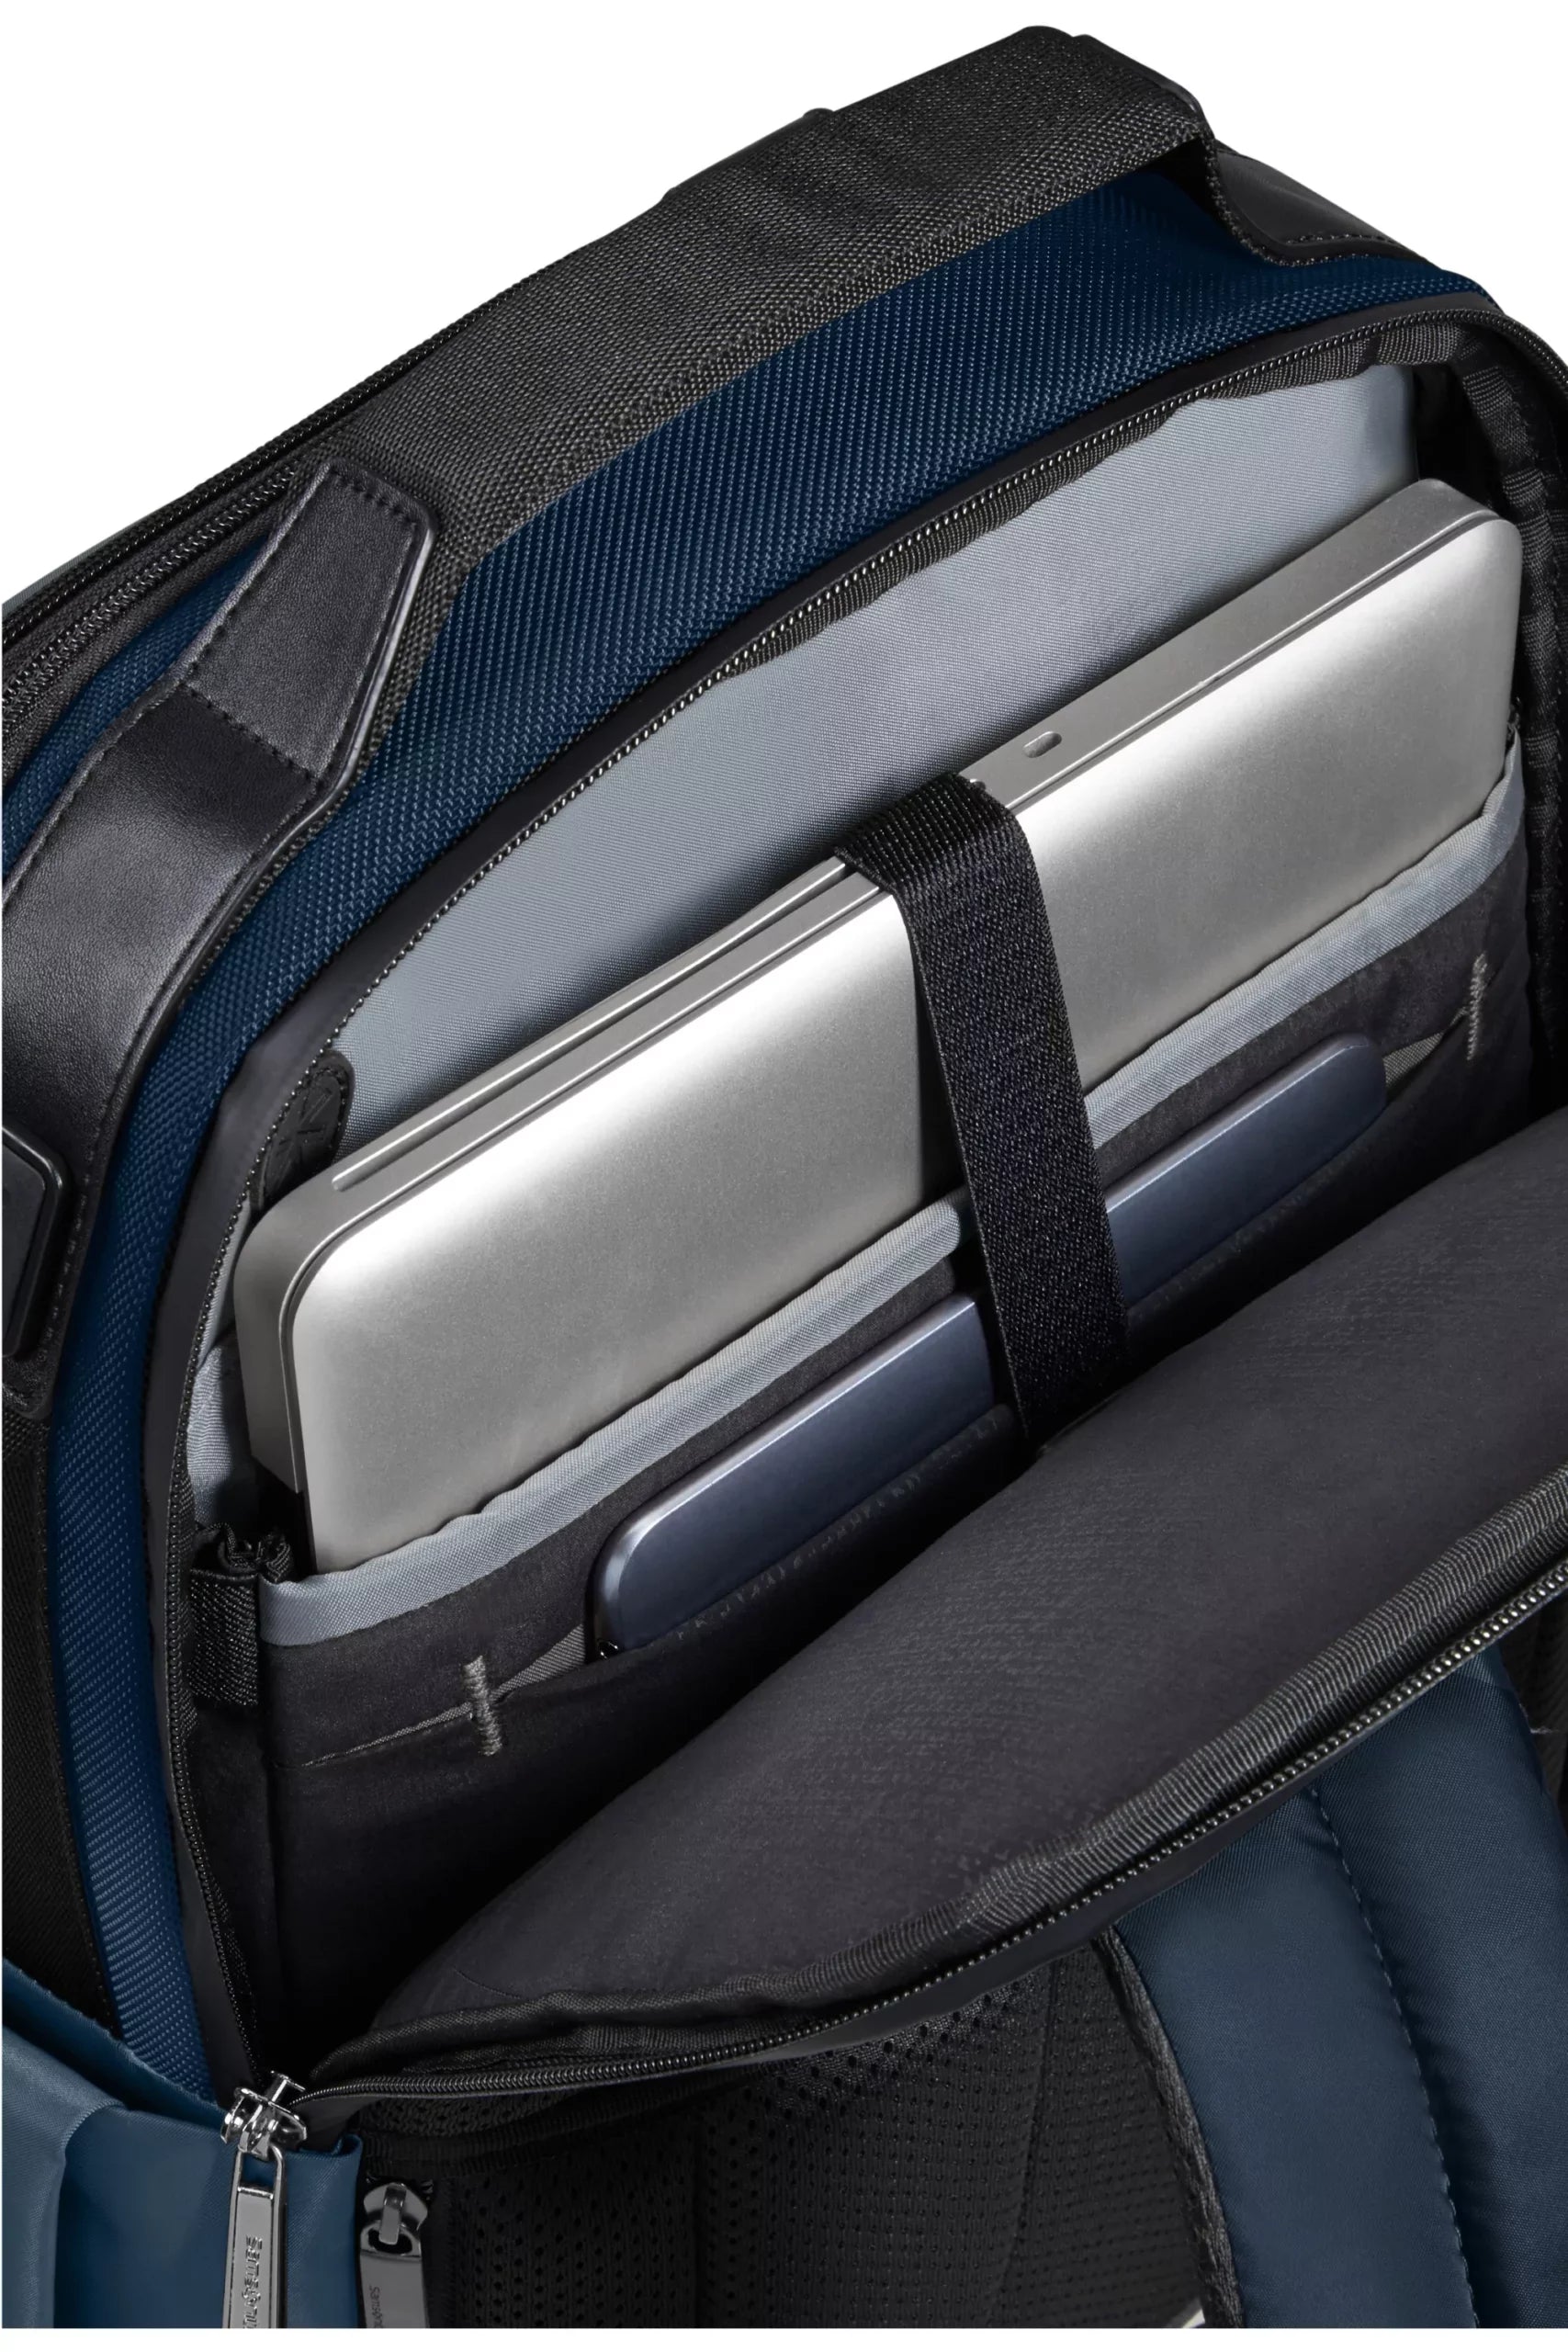 137207-1971-OPENROAD_2.0_LAPTOP_BACKPACK_LAPTOP-COMPARTMENT_1-5b0dd8b7-69ea-4652-af30-ac8a00d4cae6